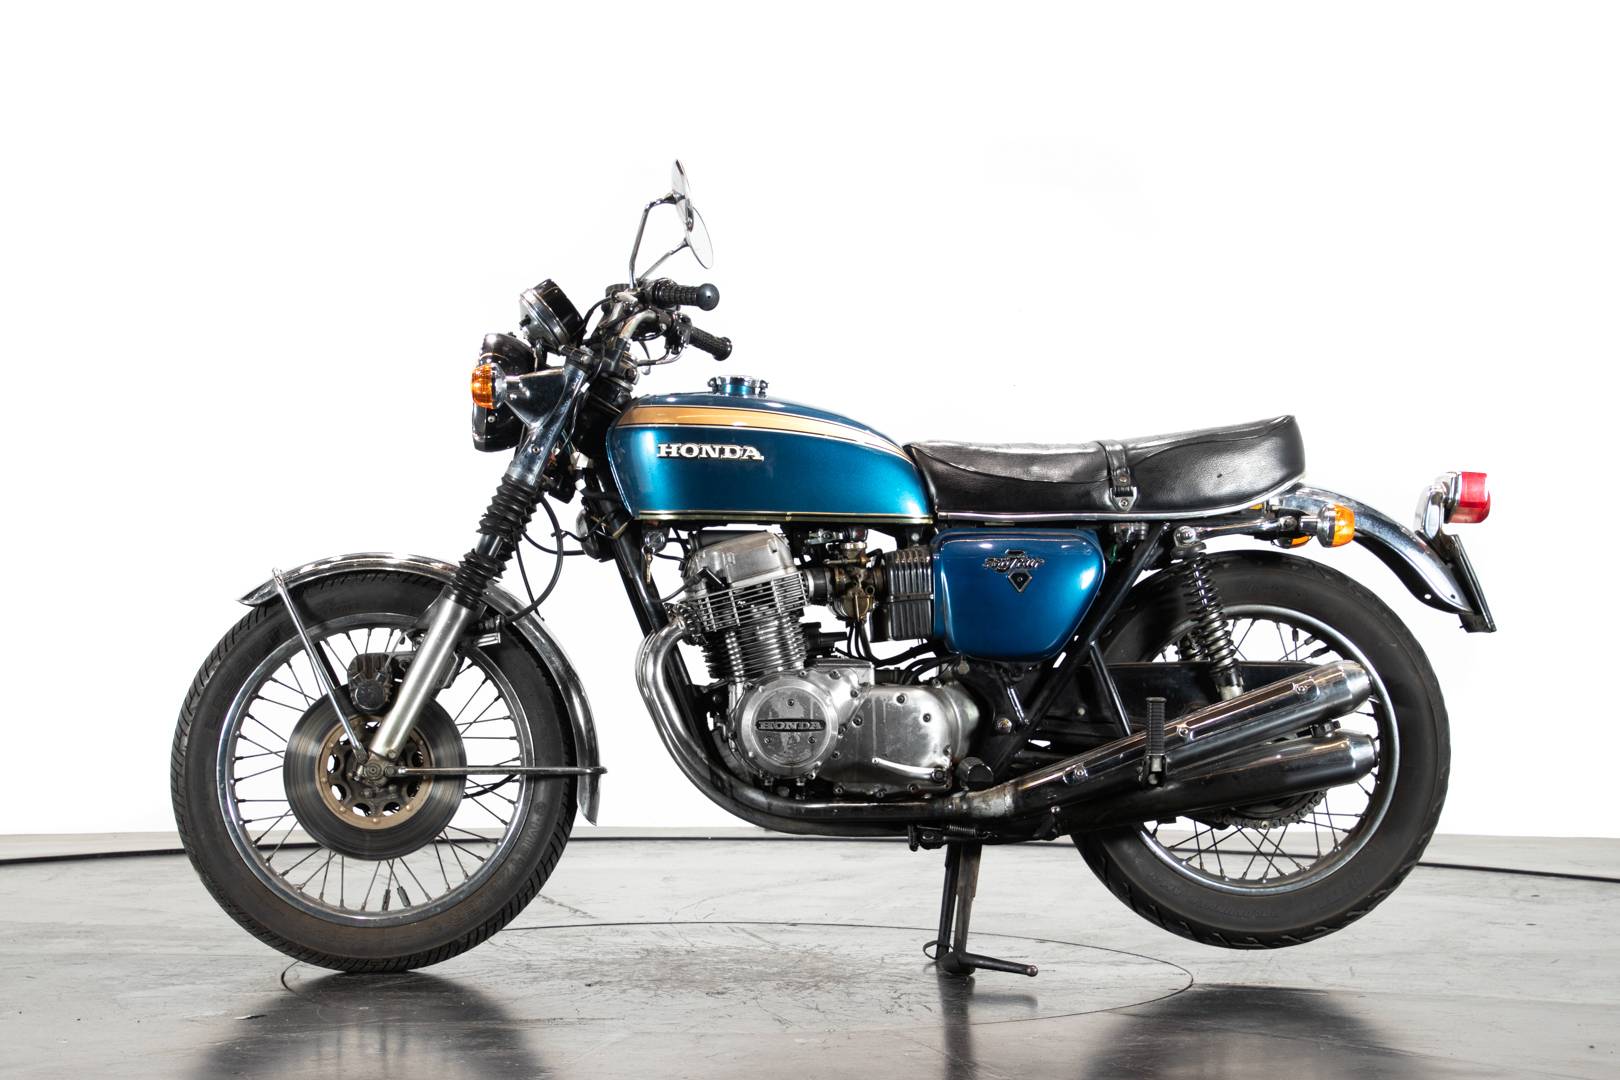 For Sale Honda CB 750 Four (1972) offered for AUD 21,944